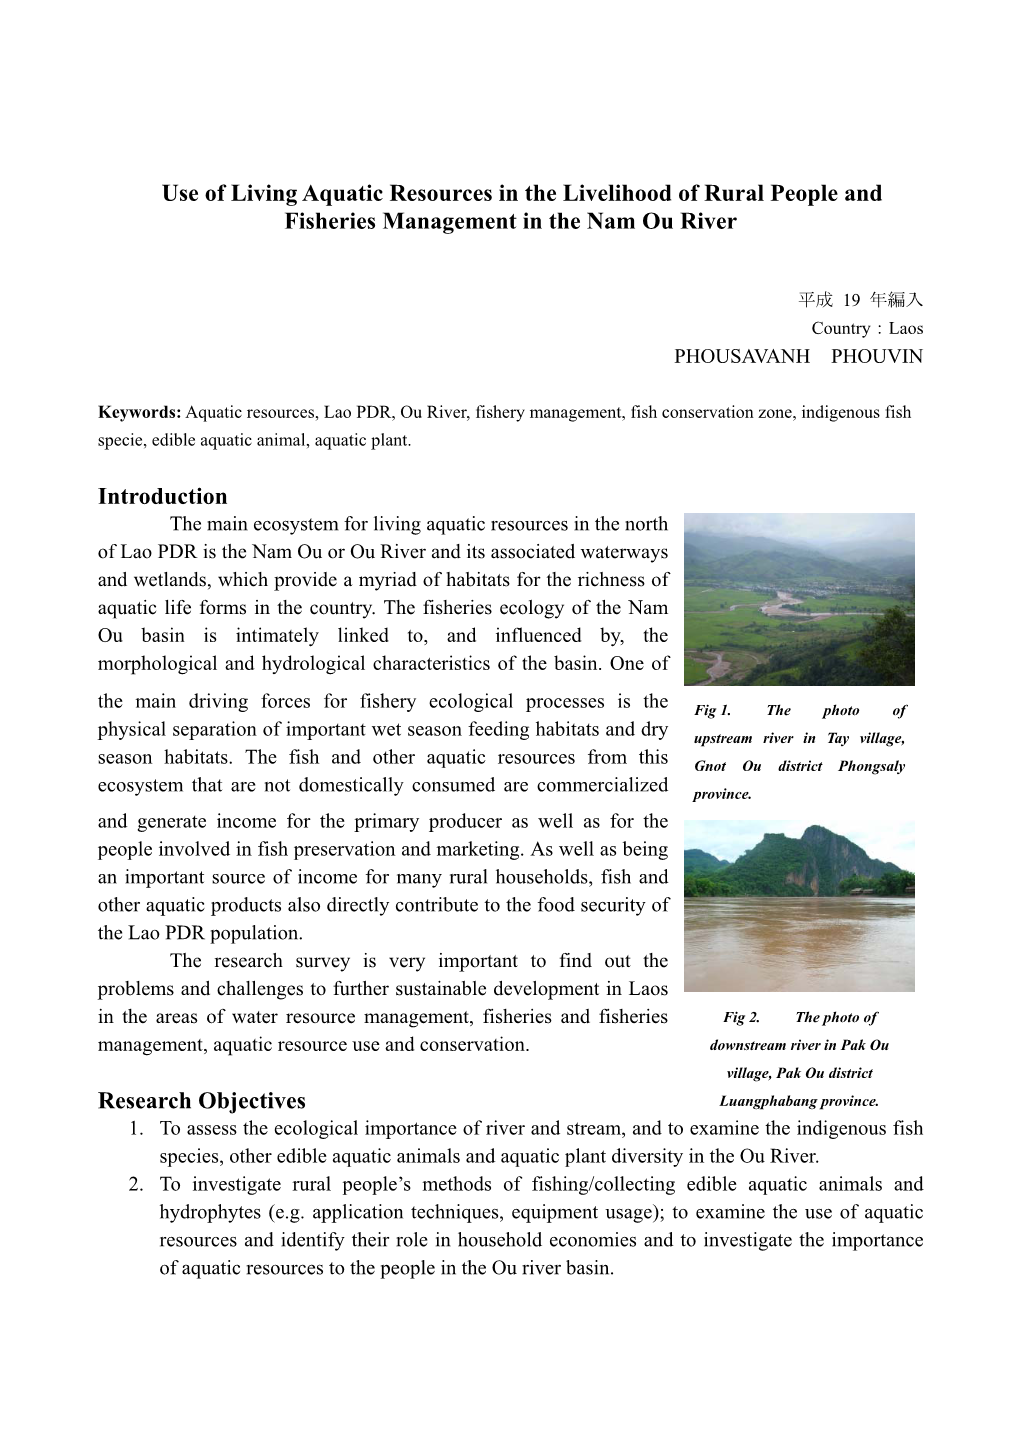 Use of Living Aquatic Resources in the Livelihood of Rural People and Fisheries Management in the Nam Ou River